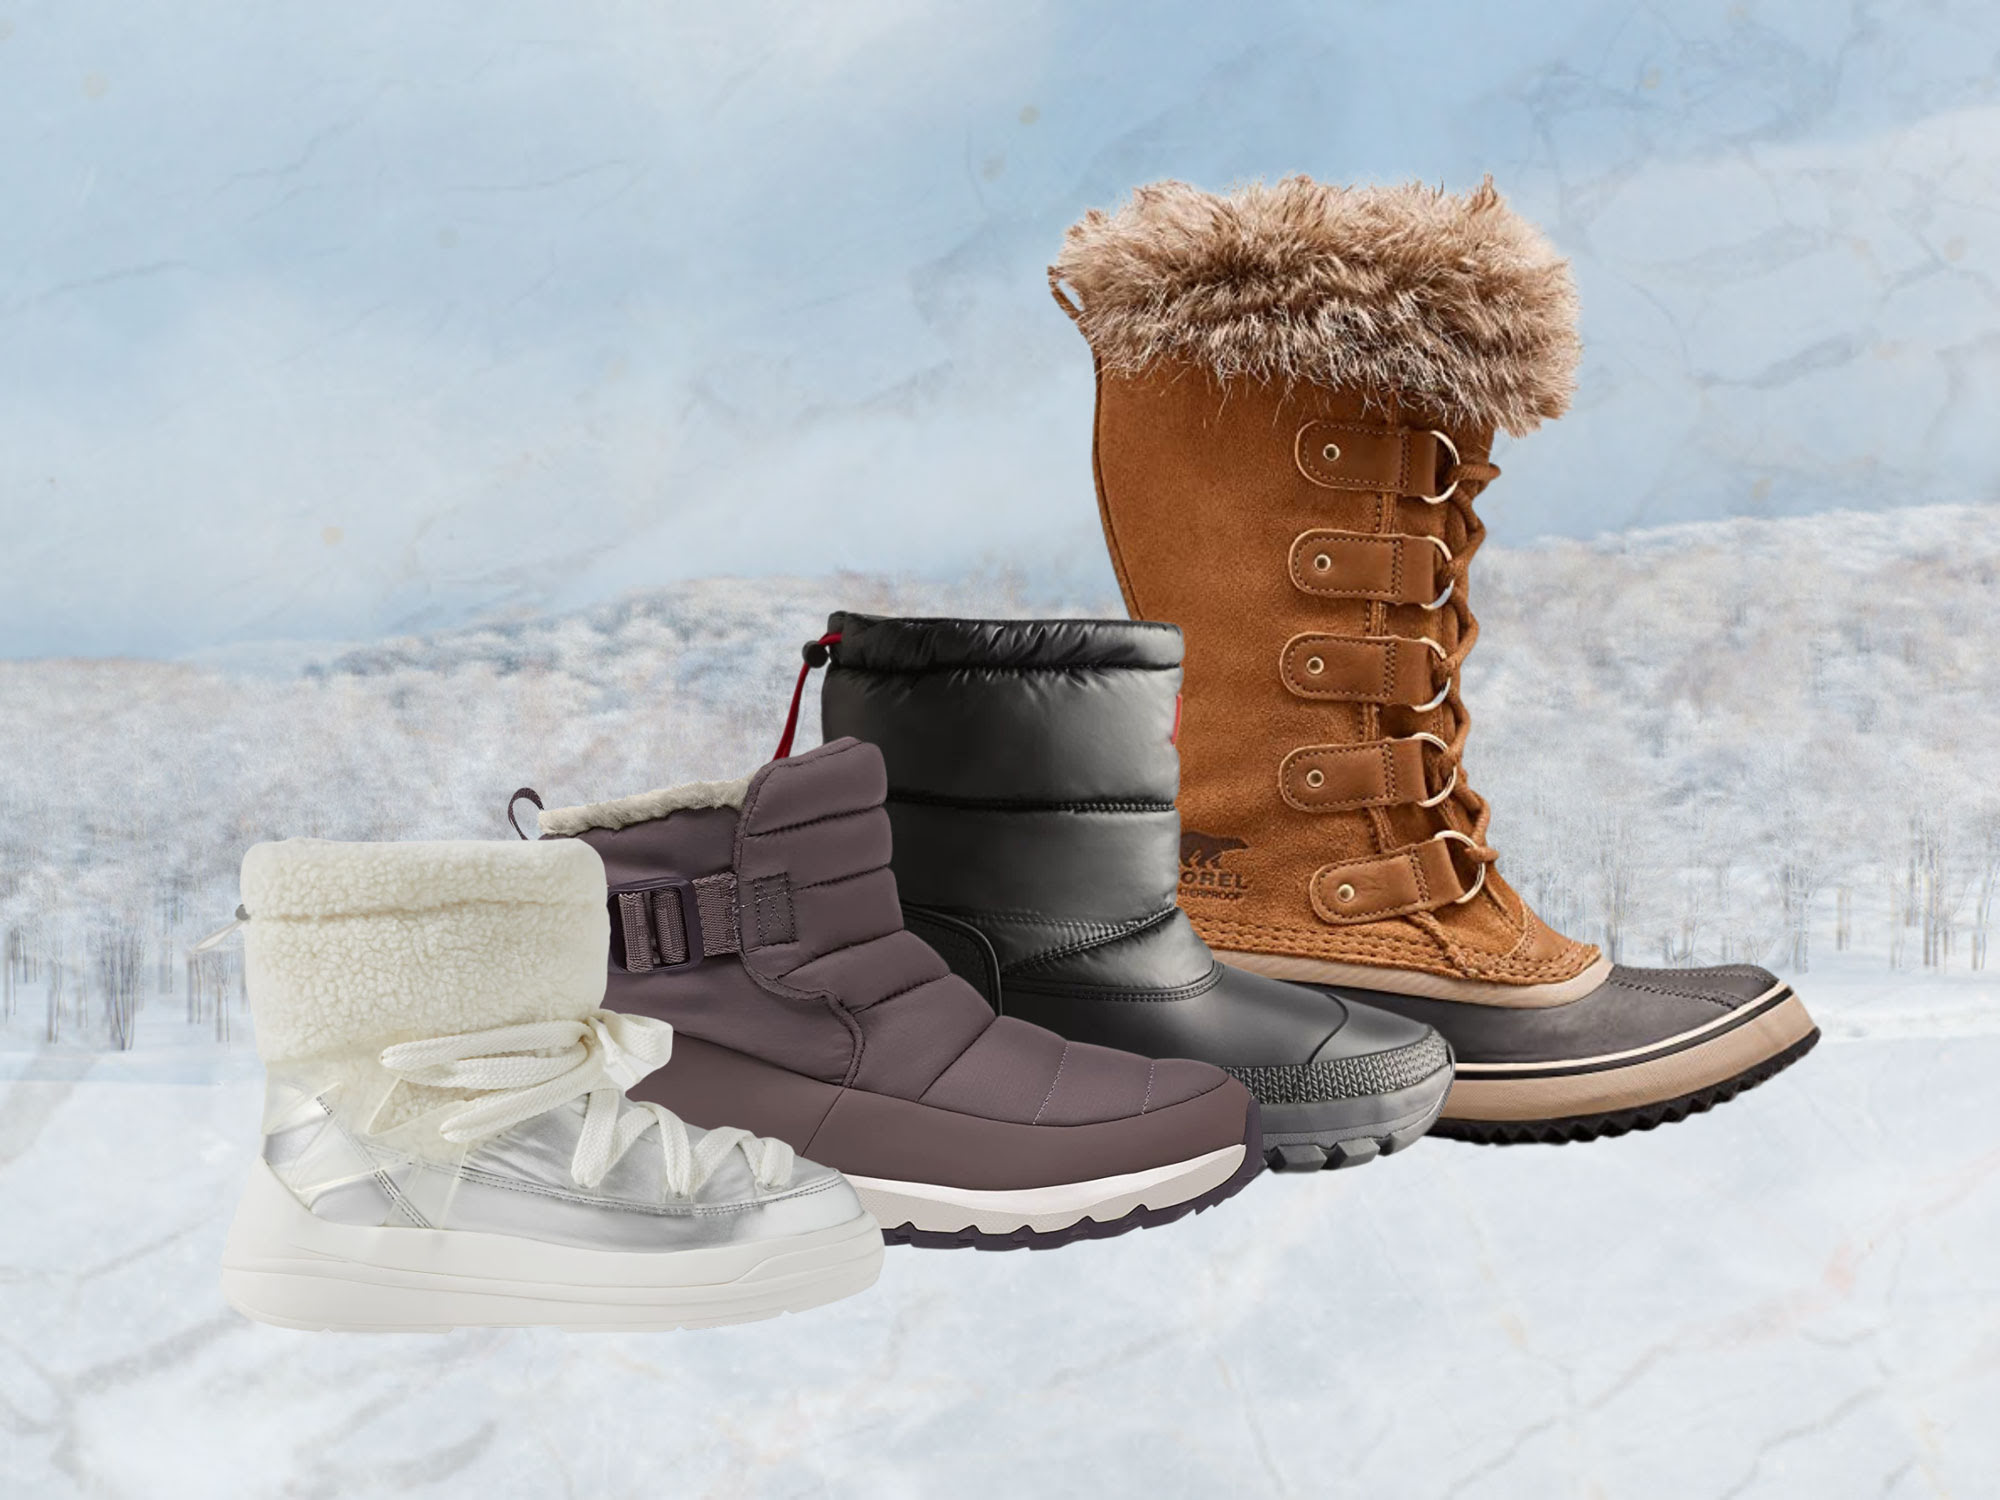 Top Snow Boots Review: Stay Warm and Stylish This Winter